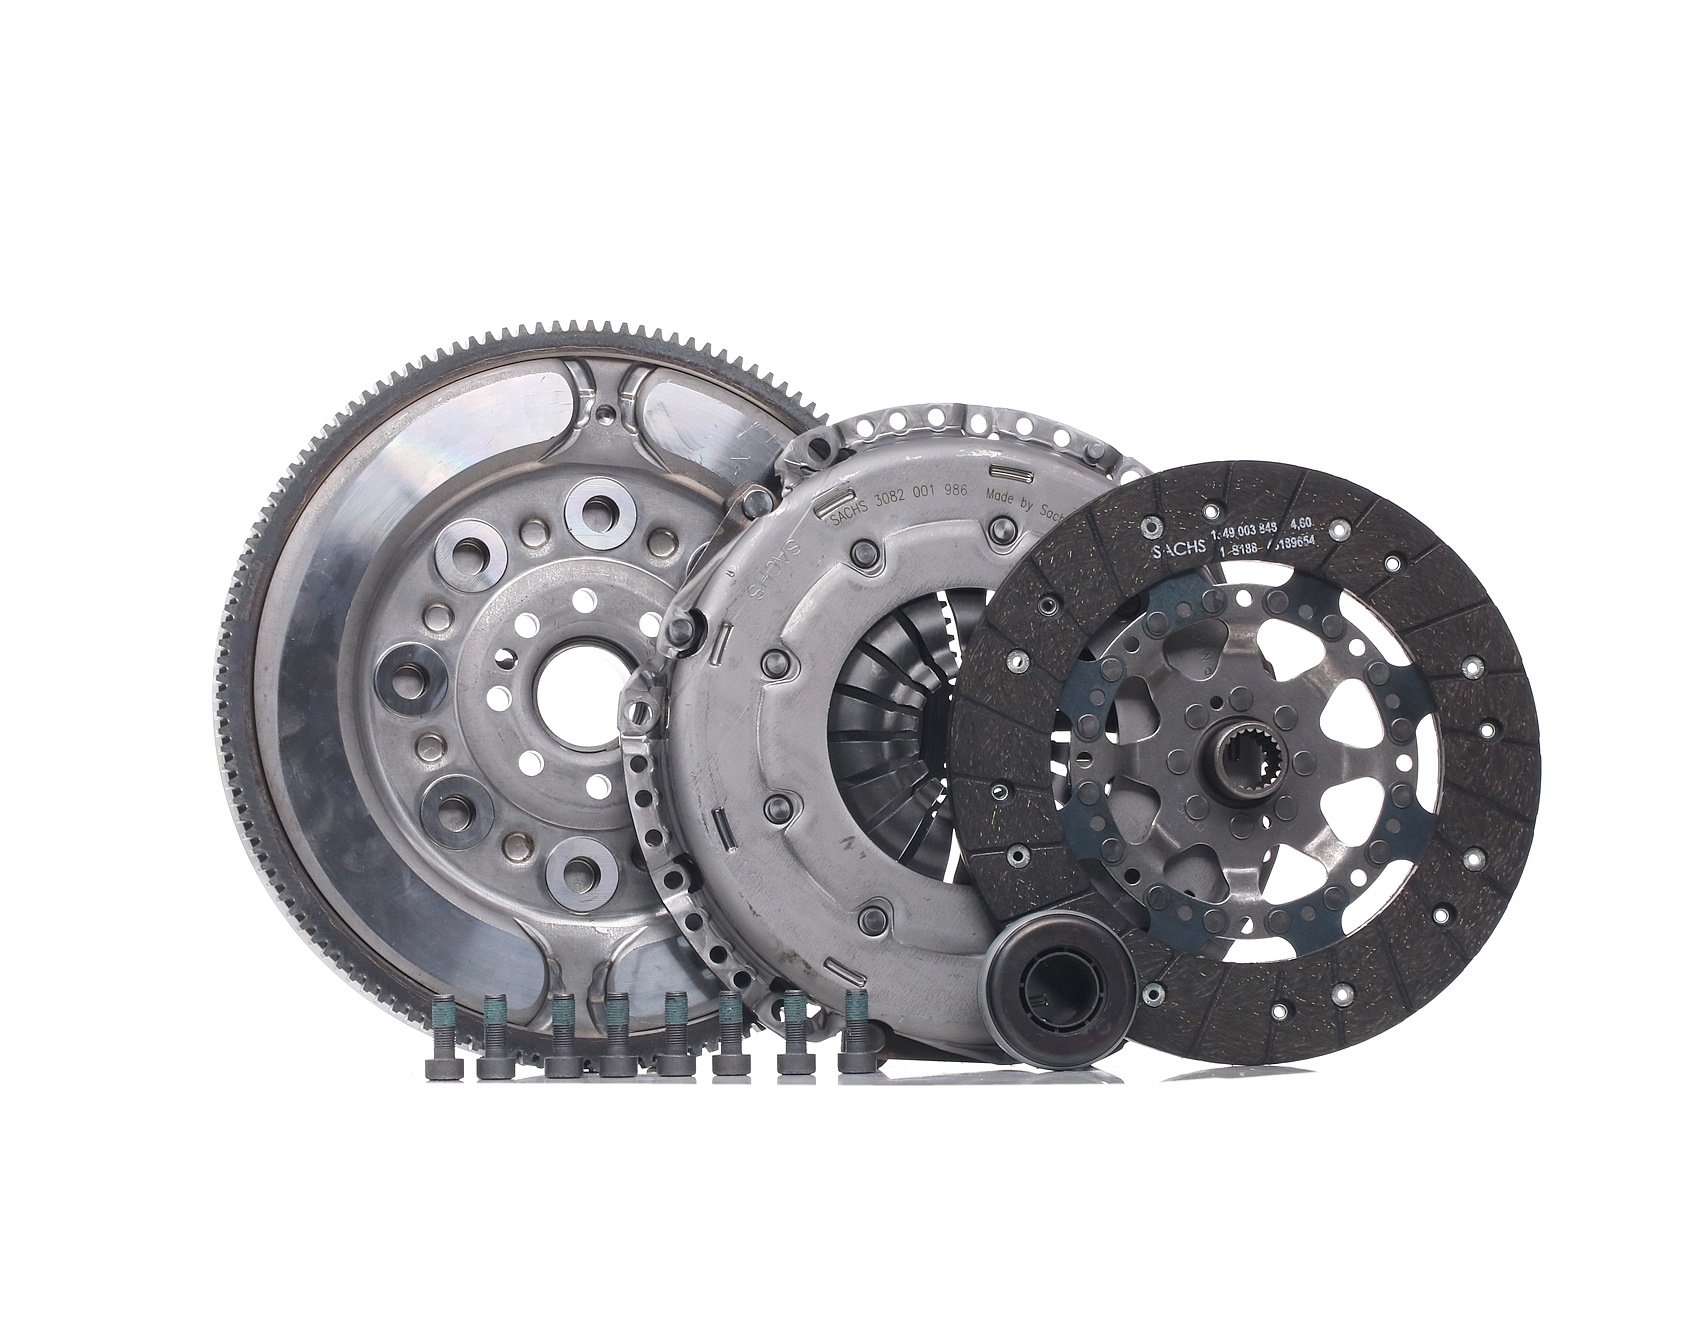 2290 601 106 SACHS Clutch set FIAT with clutch pressure plate, with dual-mass flywheel, with flywheel screws, with clutch disc, with clutch release bearing, 235mm